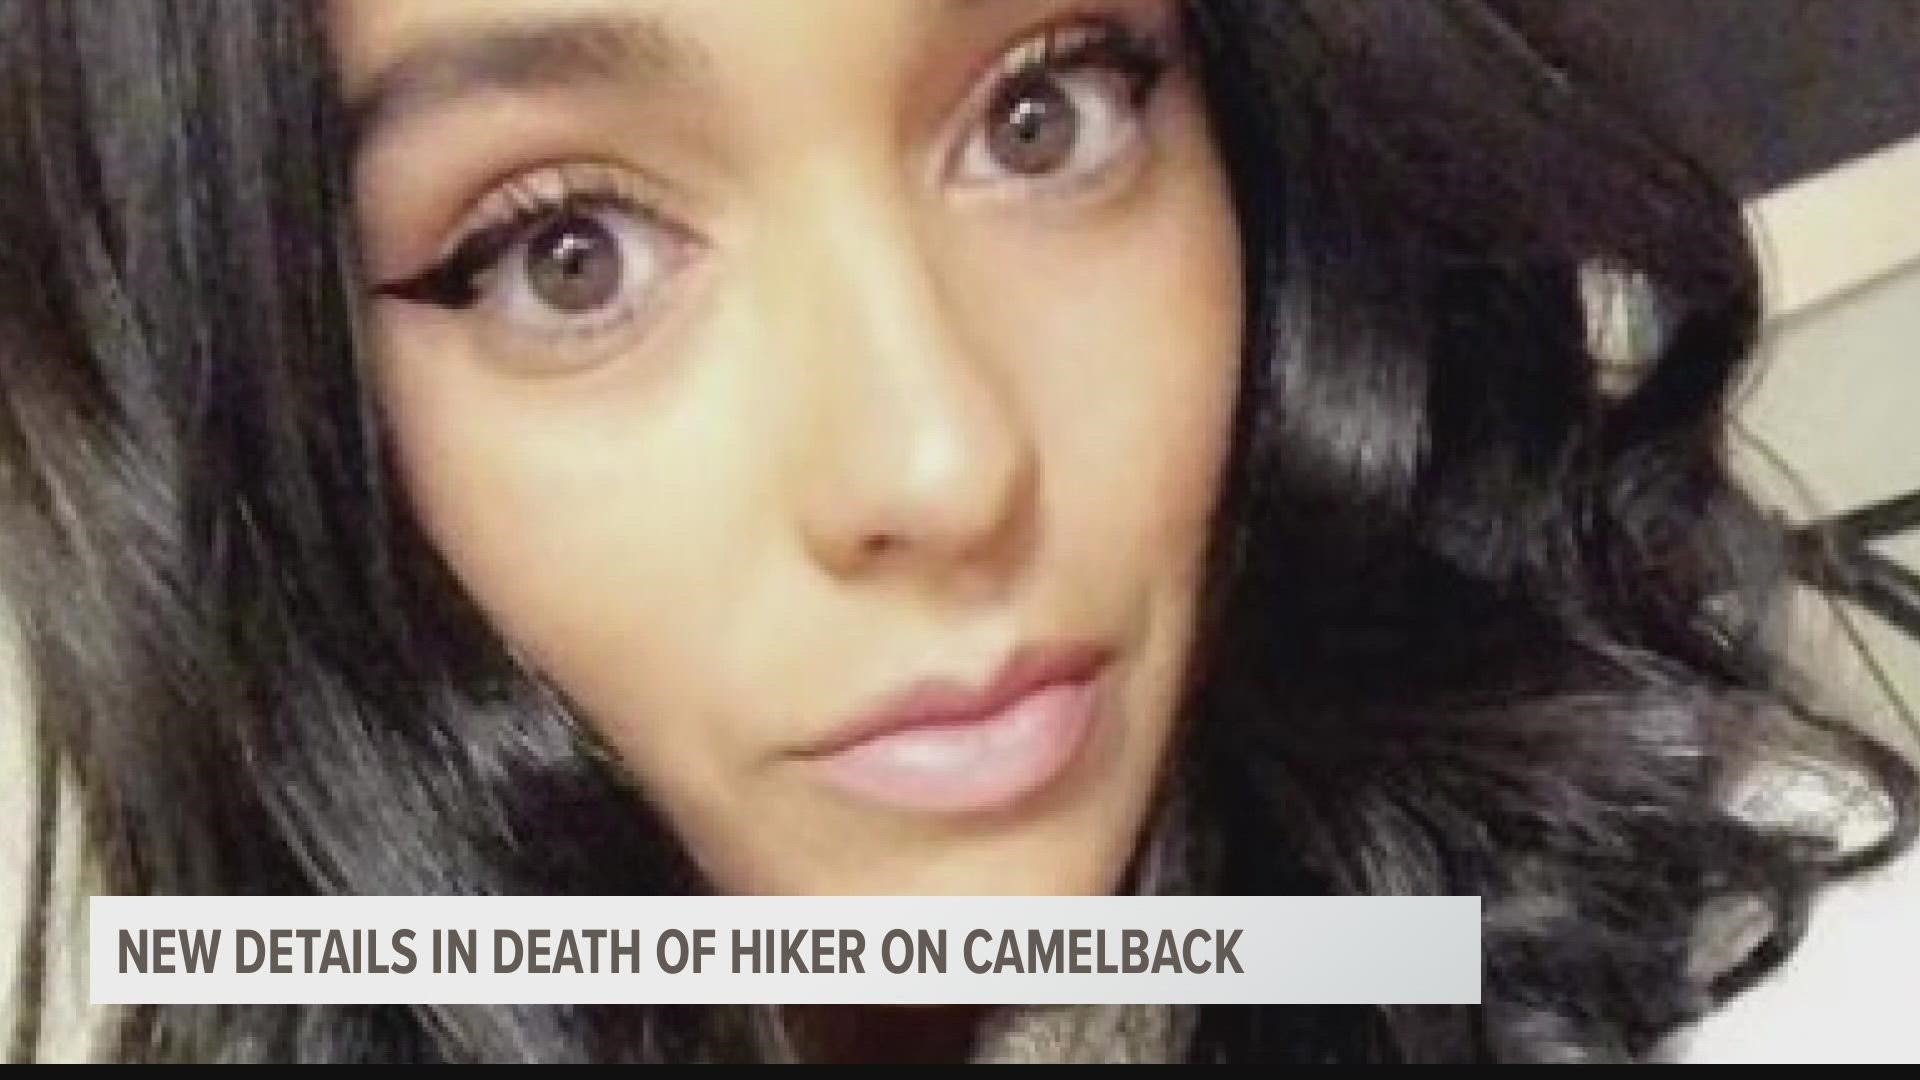 Anglea Tramonte was found dead on Friday. She was from Boston and hiking Echo Canyon Trail on Camelback Mountain with an off-duty Phoenix police officer.